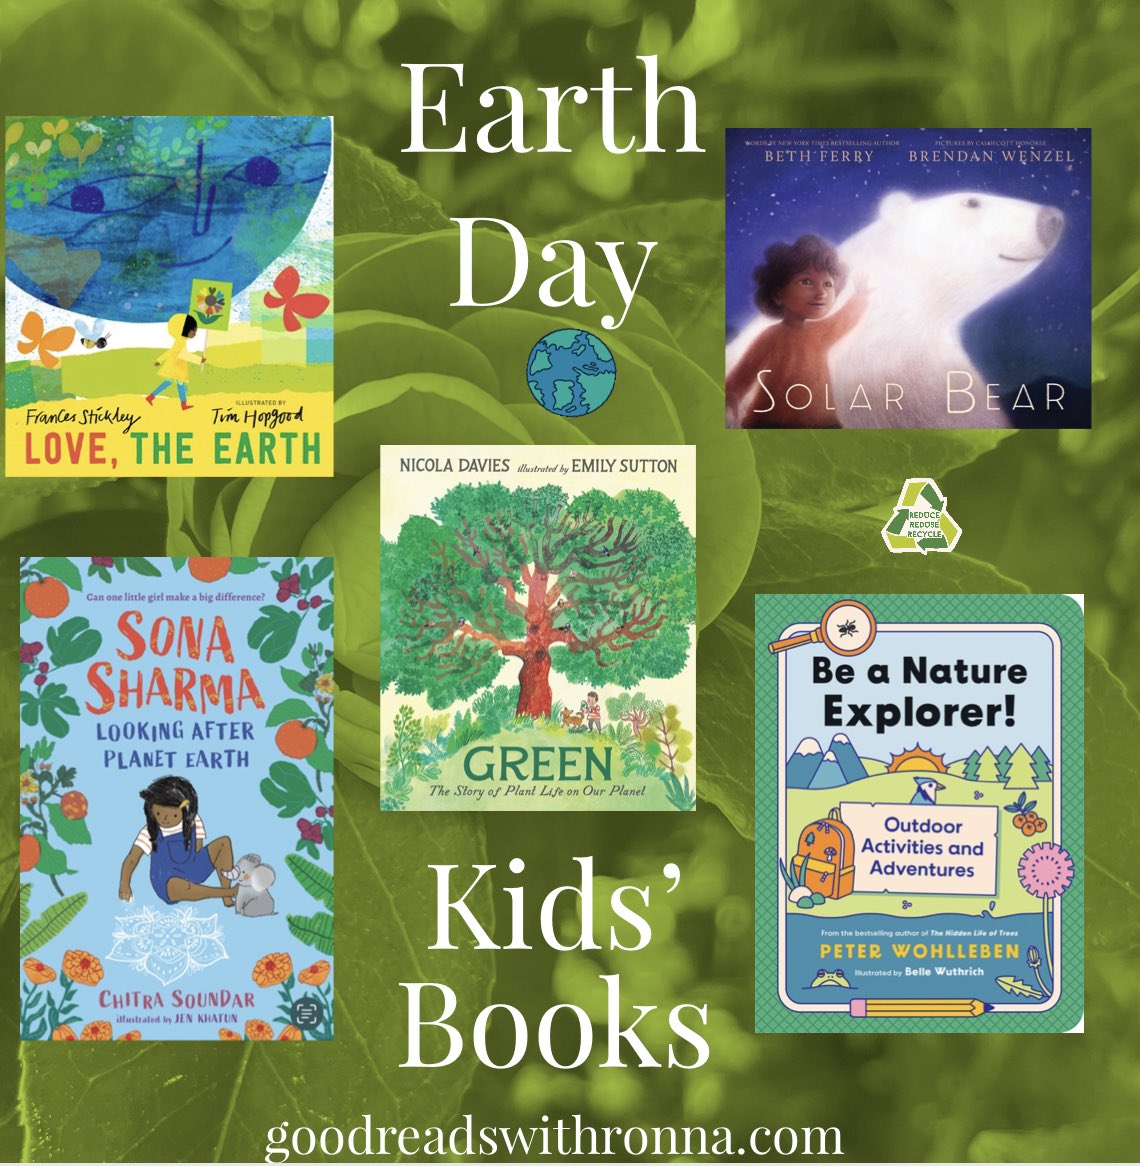 These fab five fiction + nonfiction children's books for #EarthDay2024 Day feature rhyme, outdoor activities, polar bears, + environmental awareness to inspire + educate kids. Reviewed by @christinevz @Candlewick @GreystoneKids @HarperCollinsCh #kidlit wp.me/p3X25n-aWP